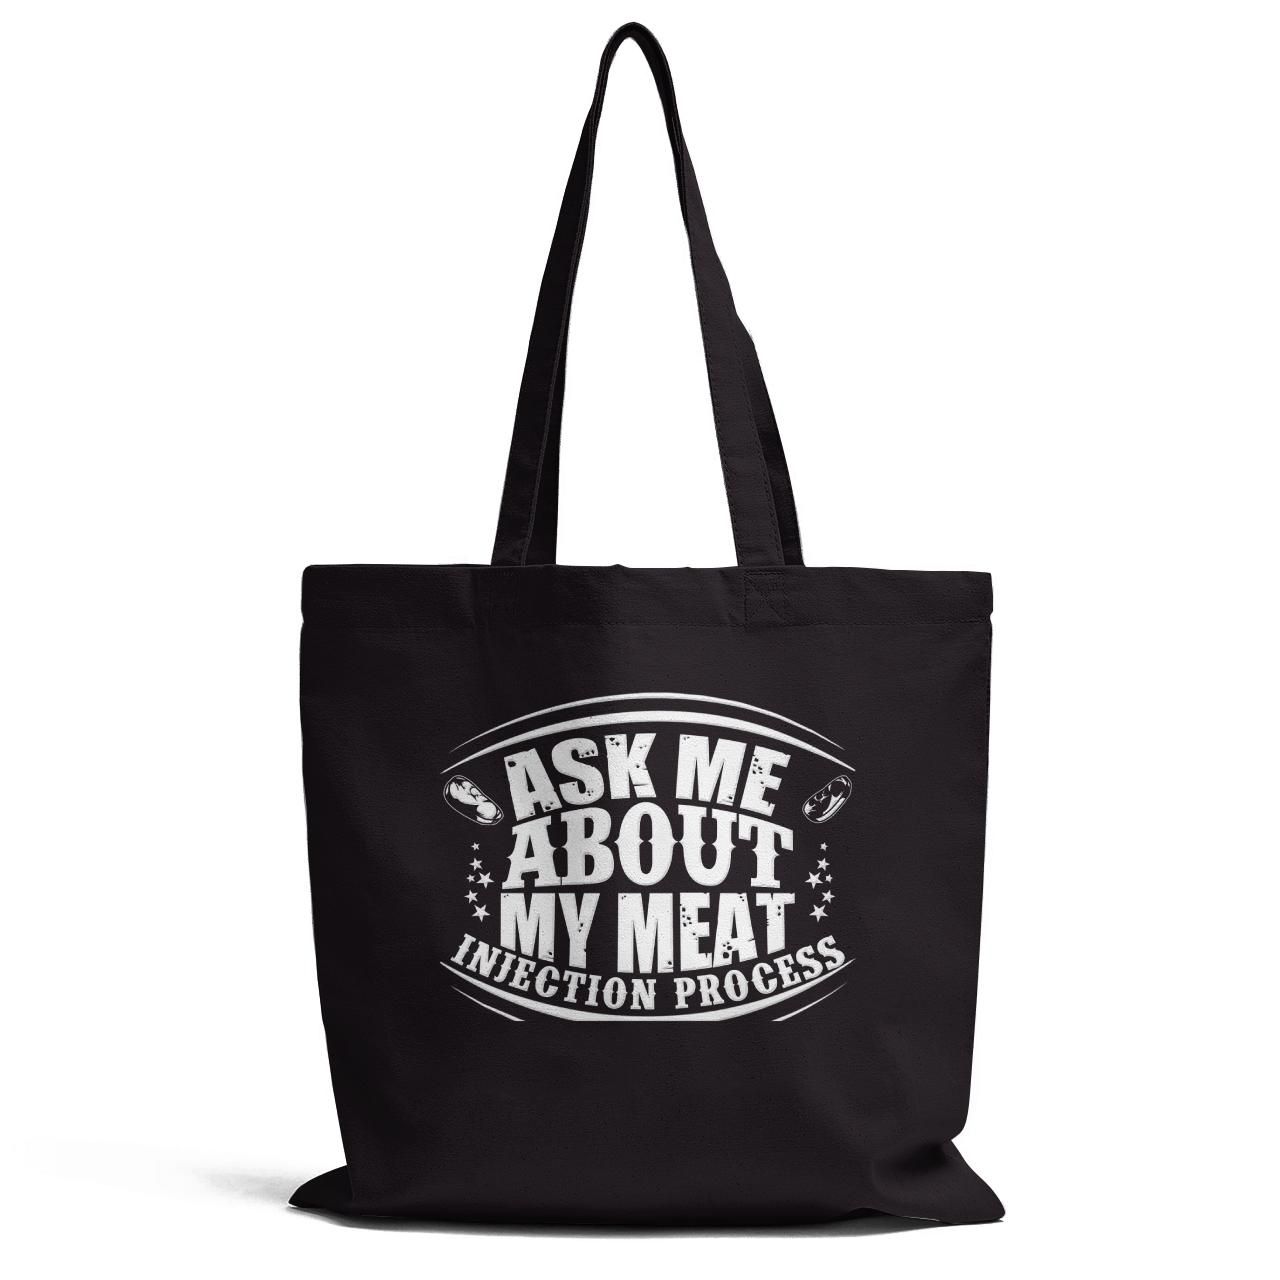 Ask Me About My Meat Iniection Process Tote Bag